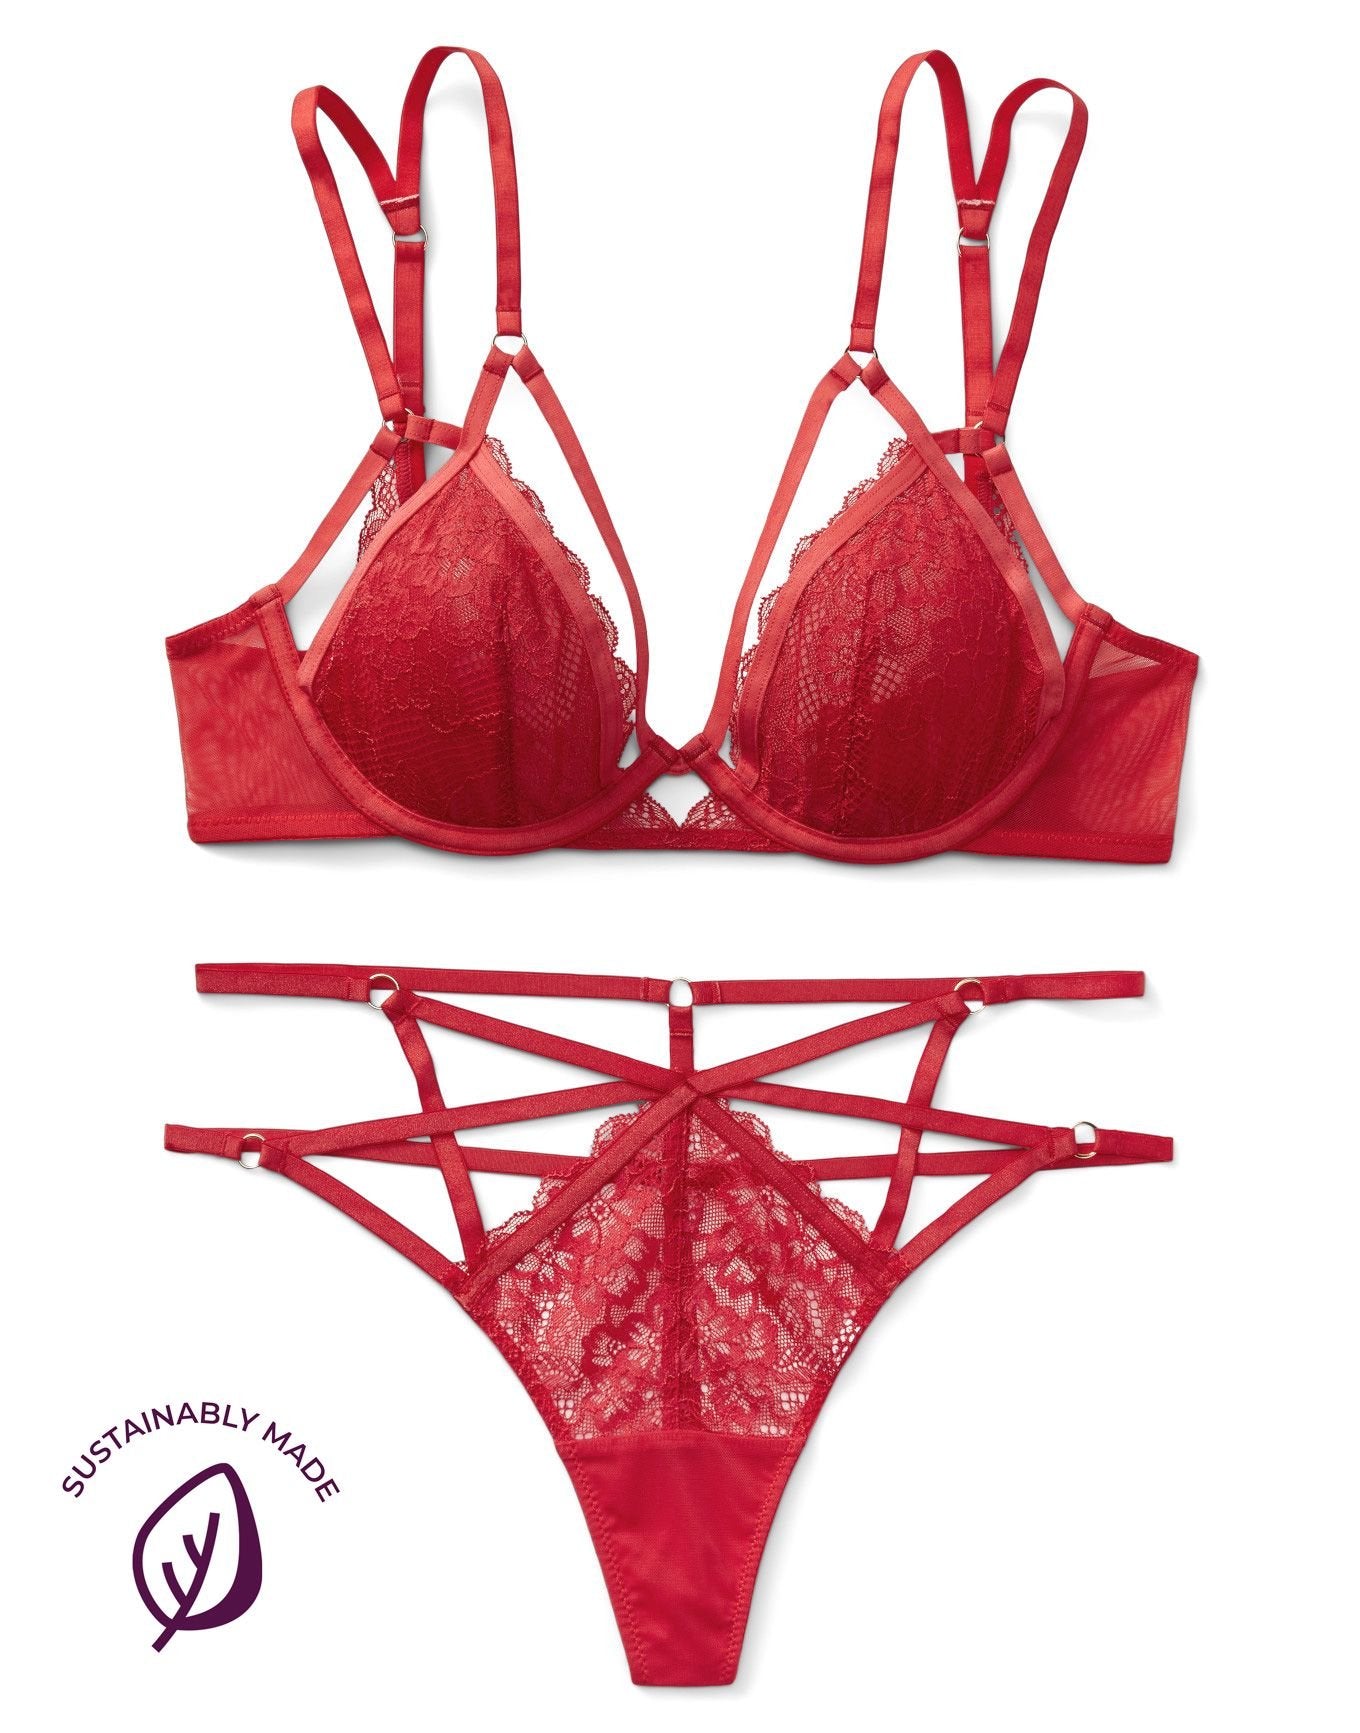 Adore Me Vianna Unlined Plunge in color Poinsettia and shape plunge